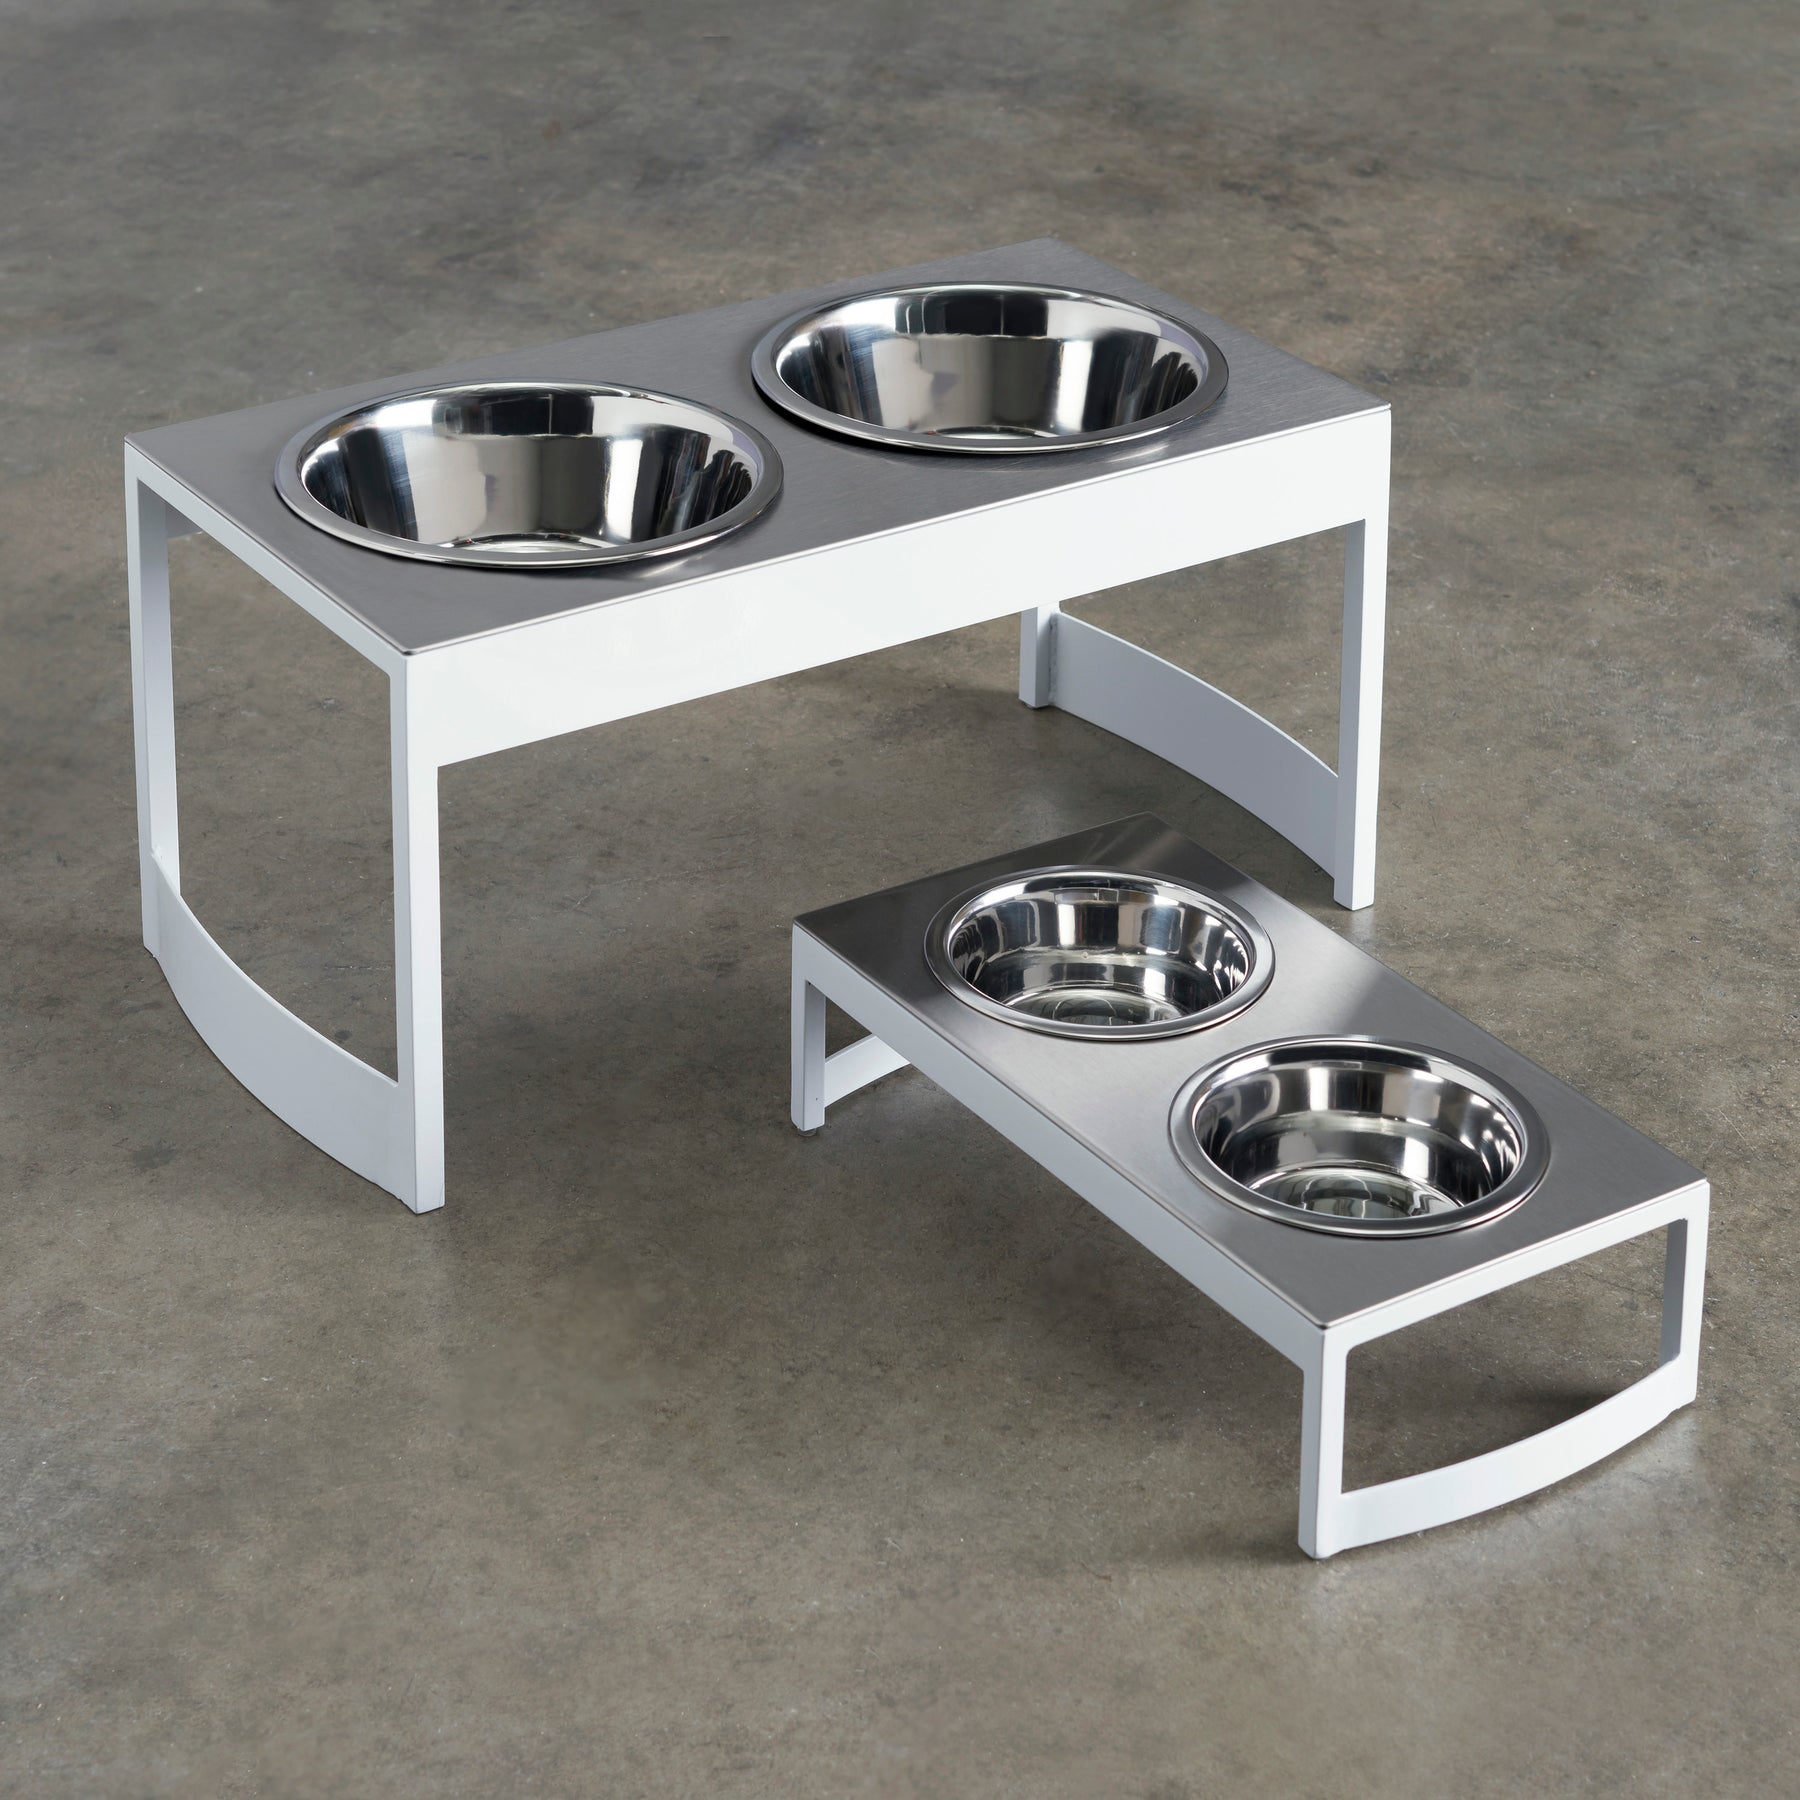 Single Elevated Dog Bowl Stand Set. S - XL Modern Raised Dog Food and Best  Water Bowl Stands, w/ Stainless Steel Bowls. Small, Large